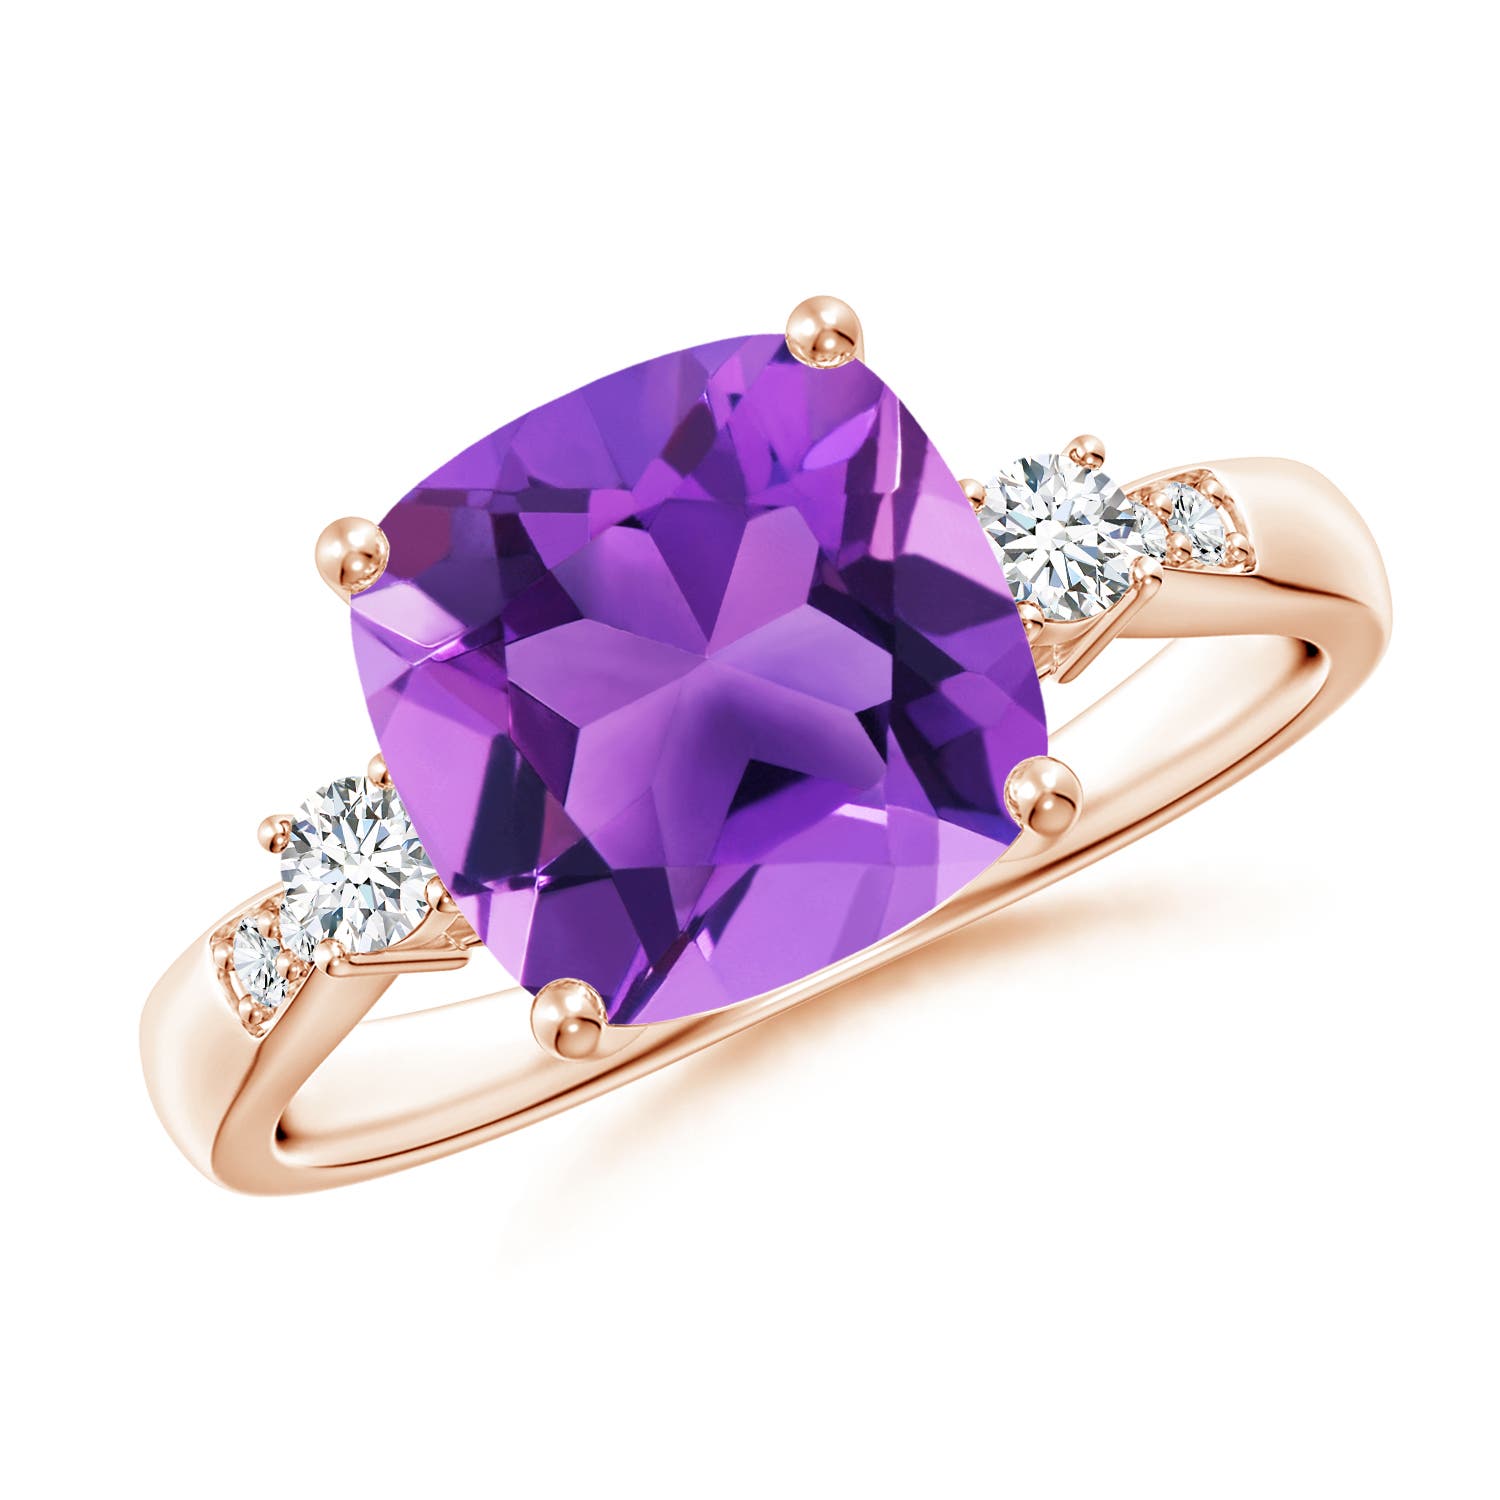 AAA - Amethyst / 3.27 CT / 14 KT Rose Gold